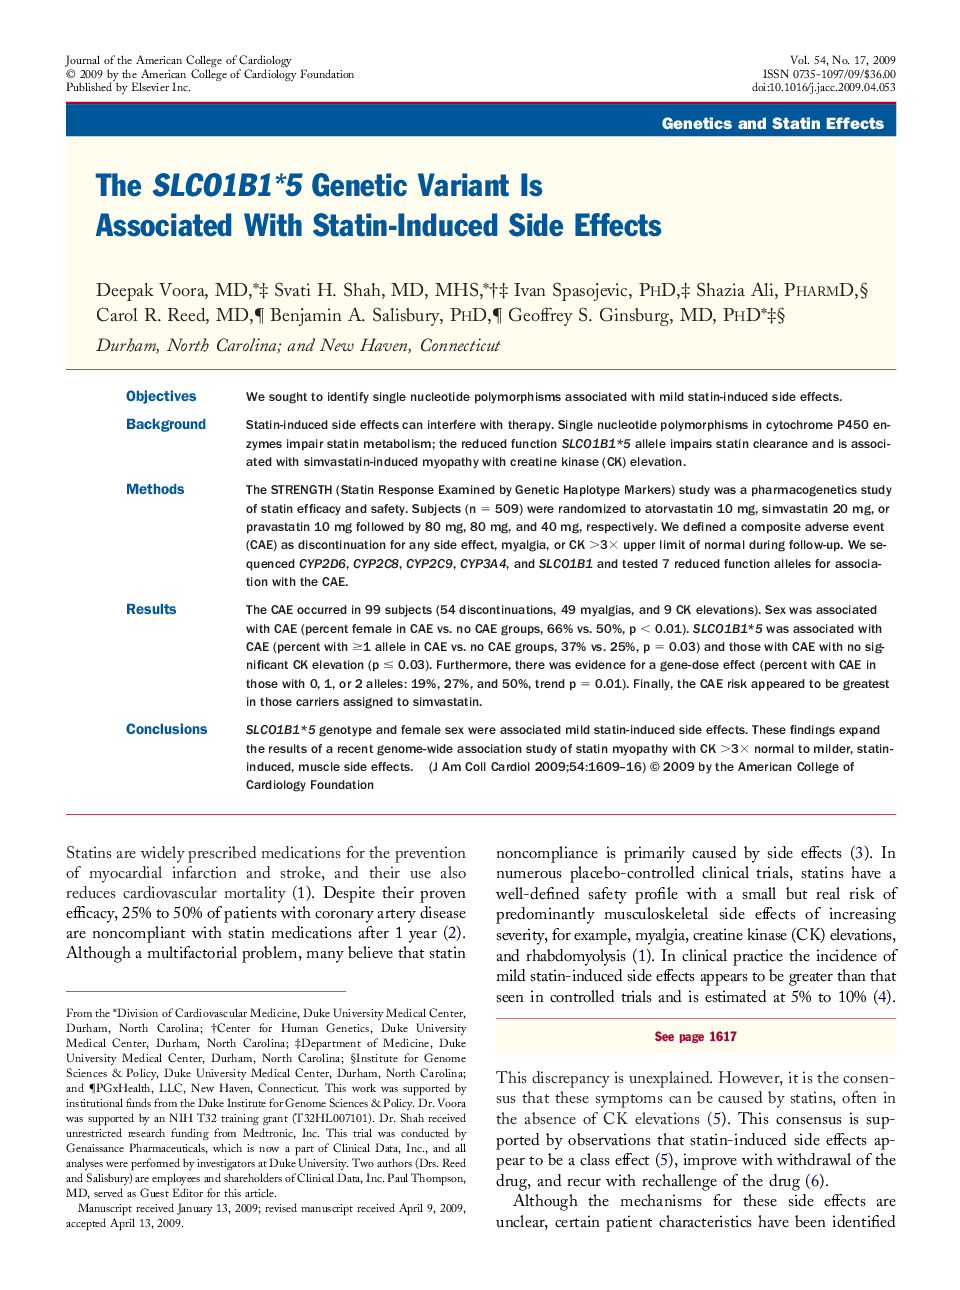 The SLCO1B1*5Genetic Variant Is Associated With Statin-Induced Side Effects 